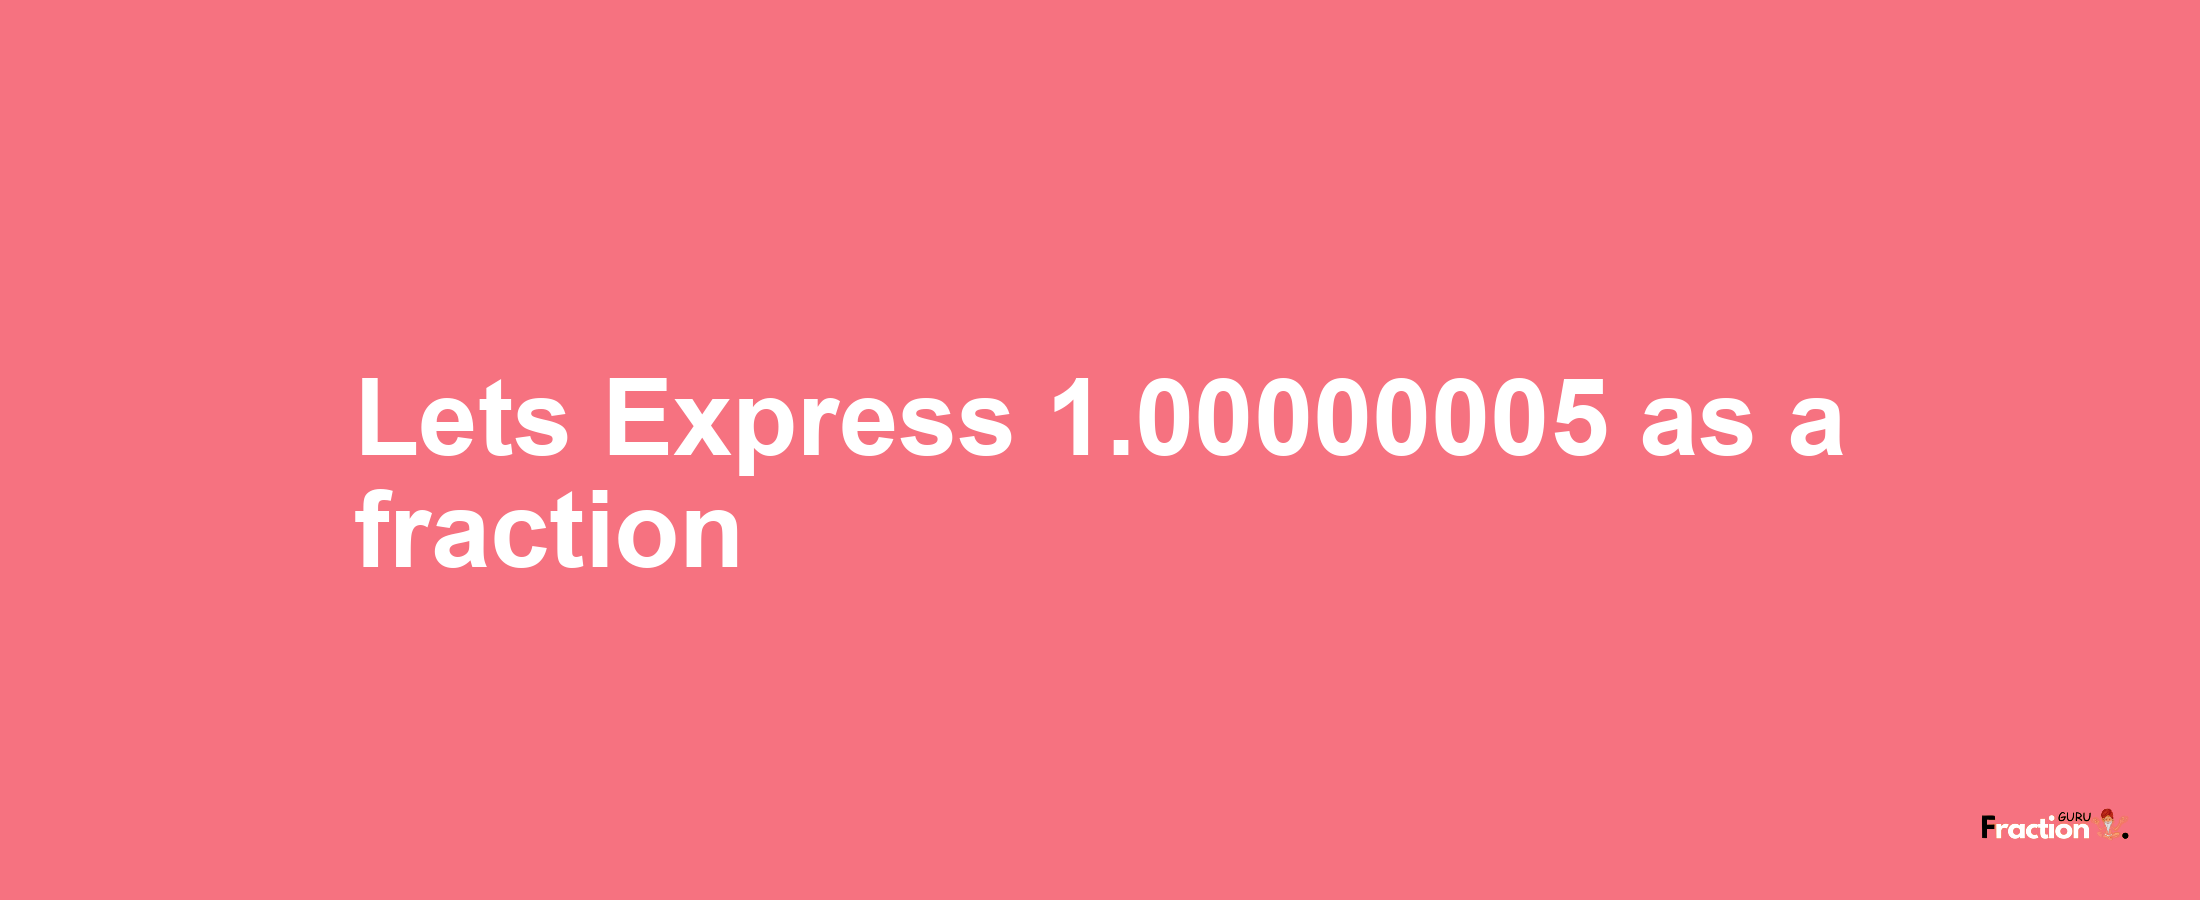 Lets Express 1.00000005 as afraction